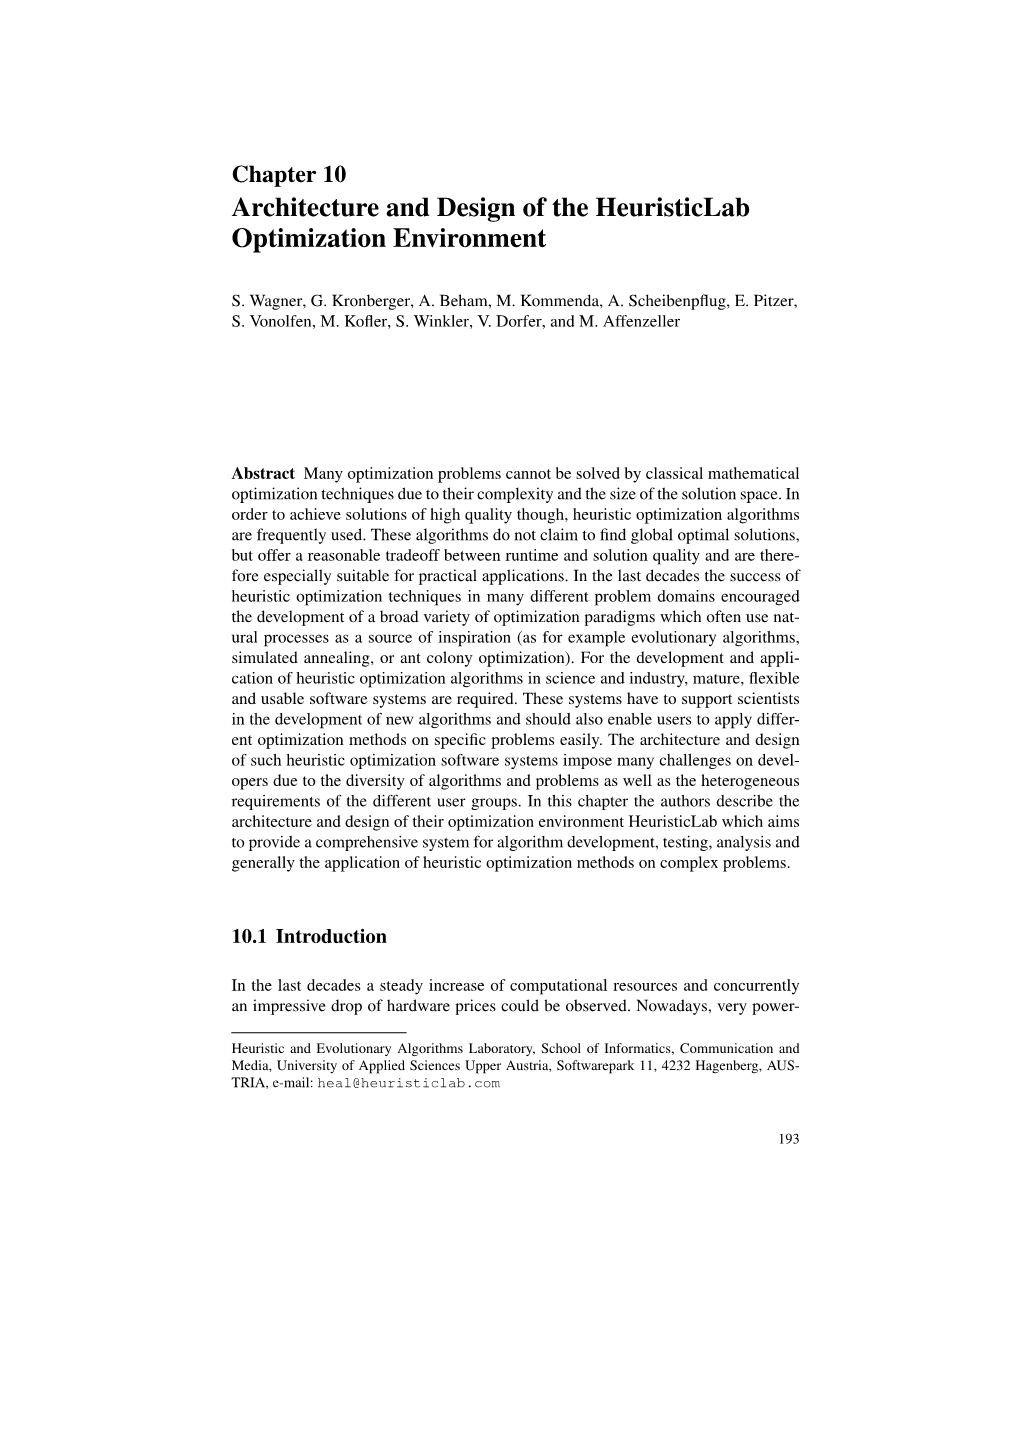 Architecture and Design of the Heuristiclab Optimization Environment